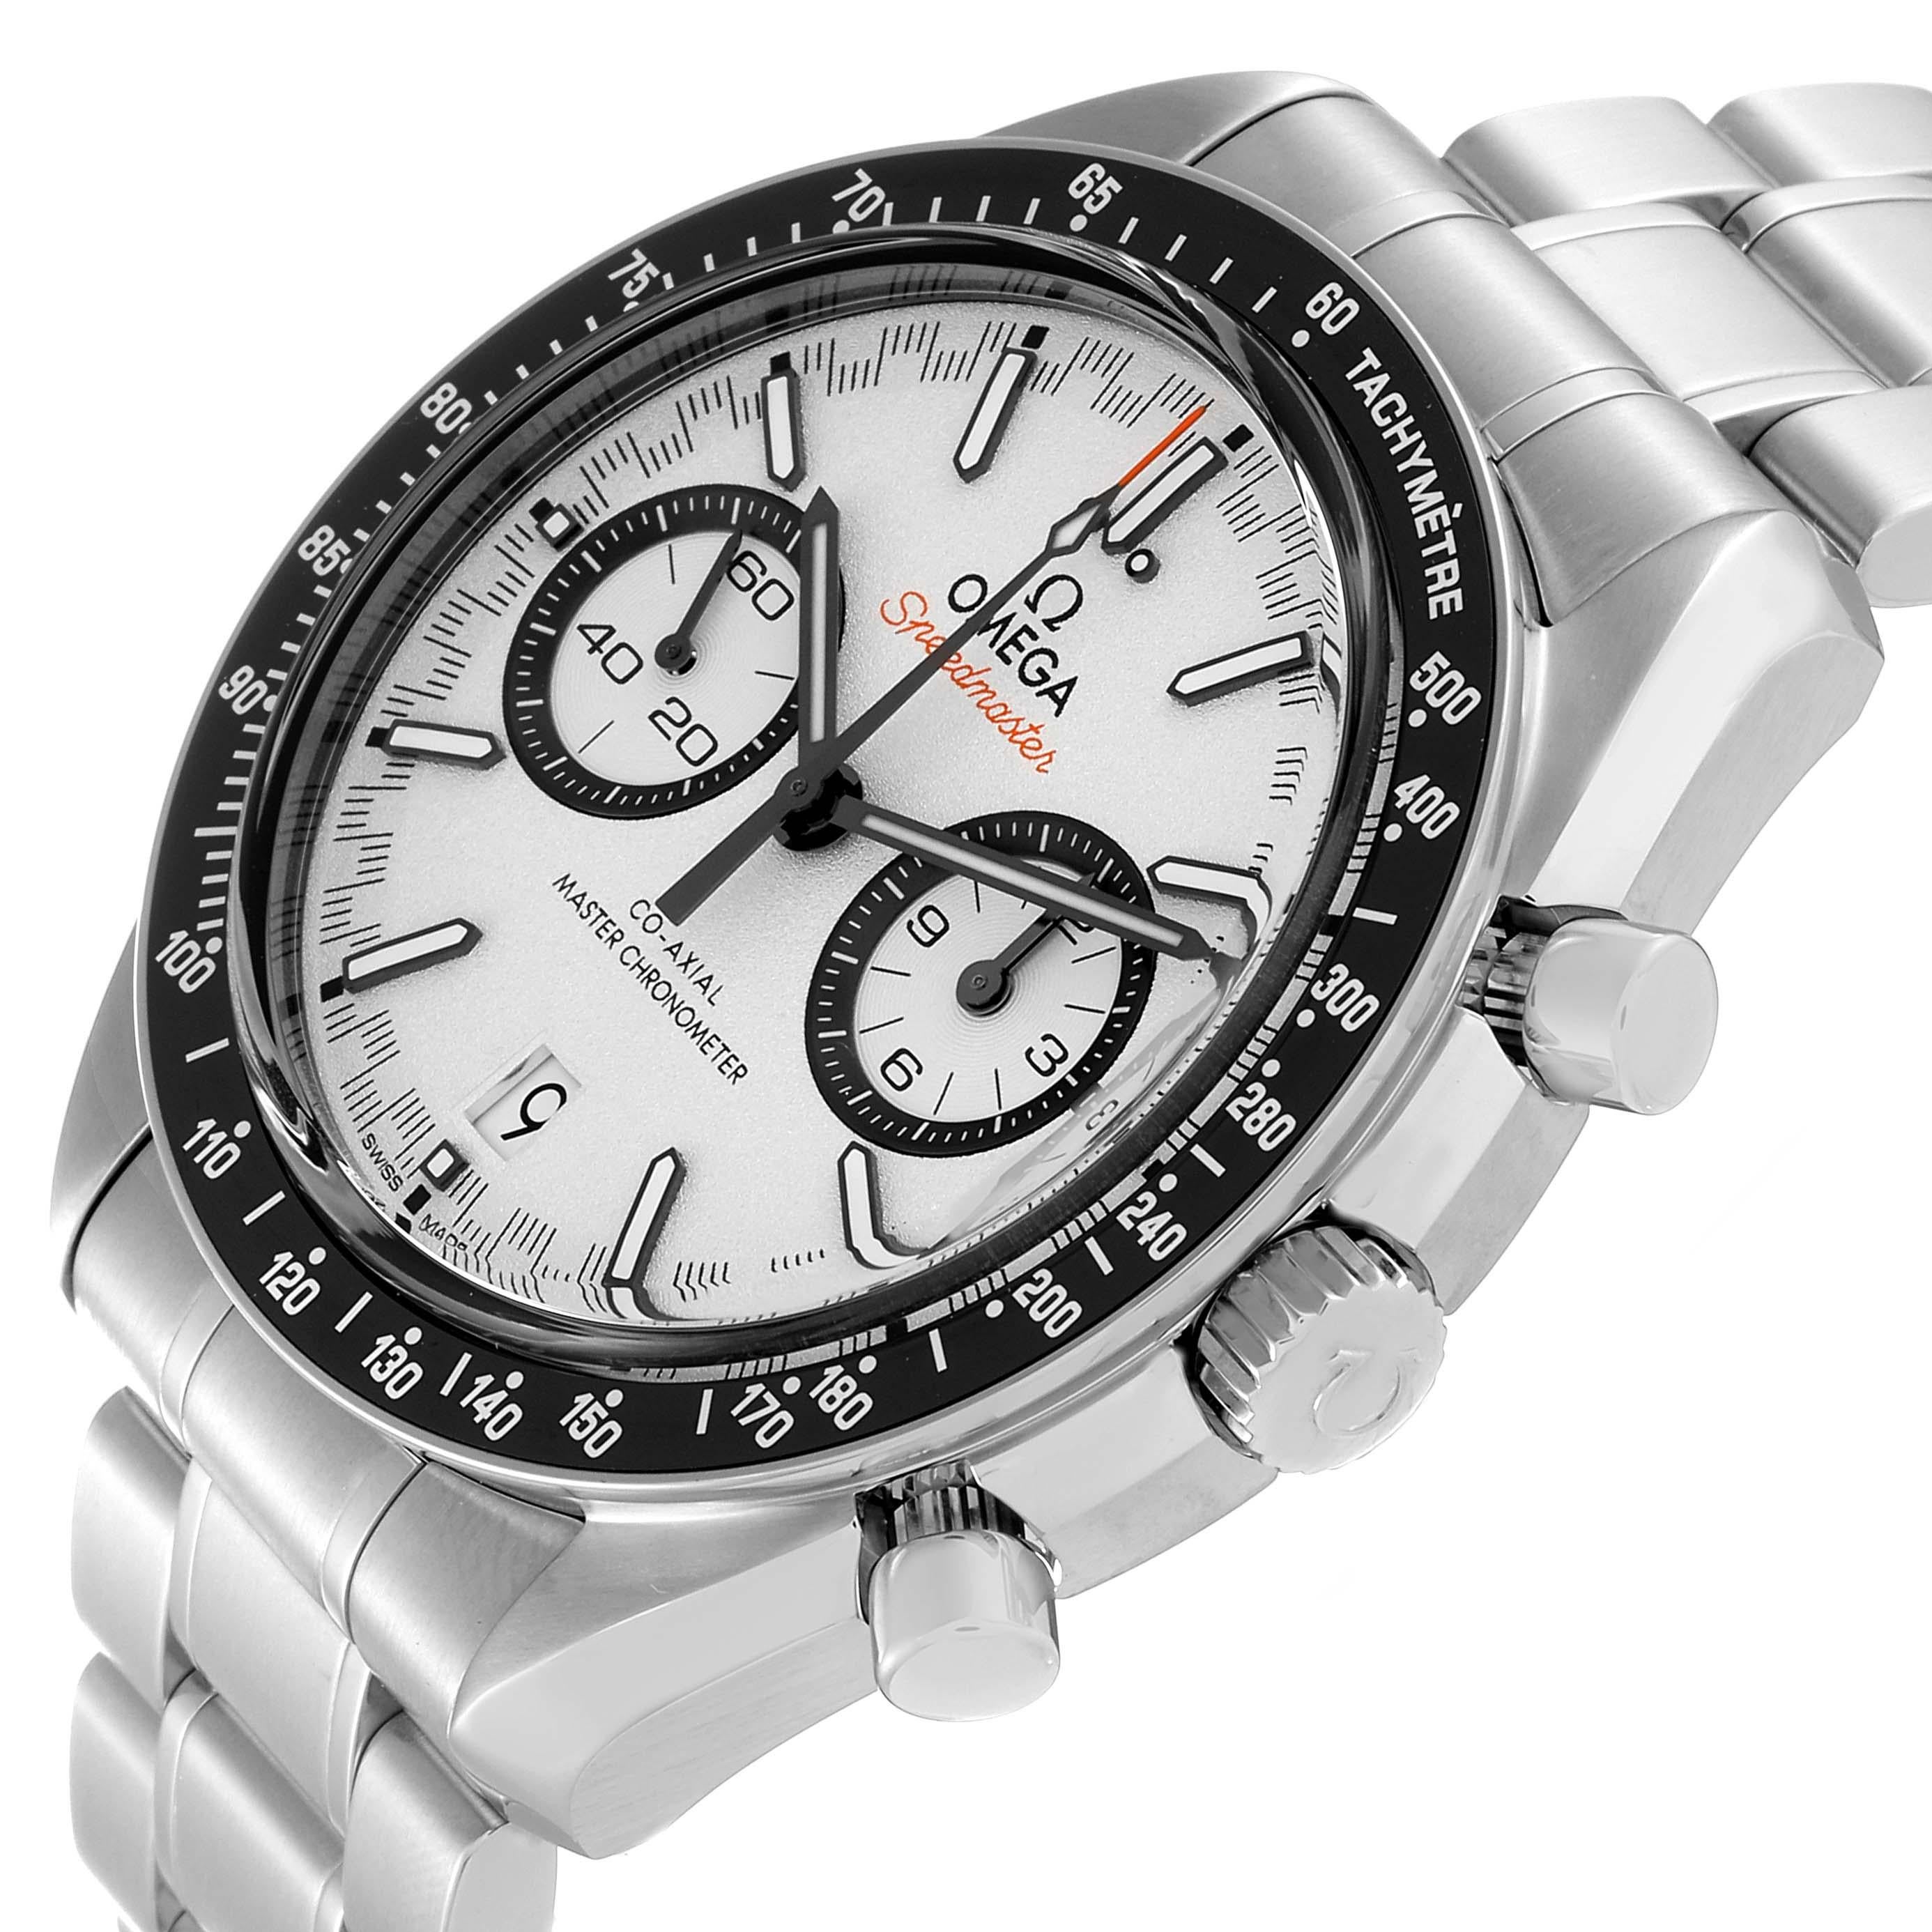 Omega Speedmaster Racing Steel Mens Watch 329.30.44.51.04.001 Box Card. Automatic self-winding chronograph movement with column wheel and Co-Axial escapement. Certified Master chronometer, resistant to magnetic fields reaching 15,000 gauss.